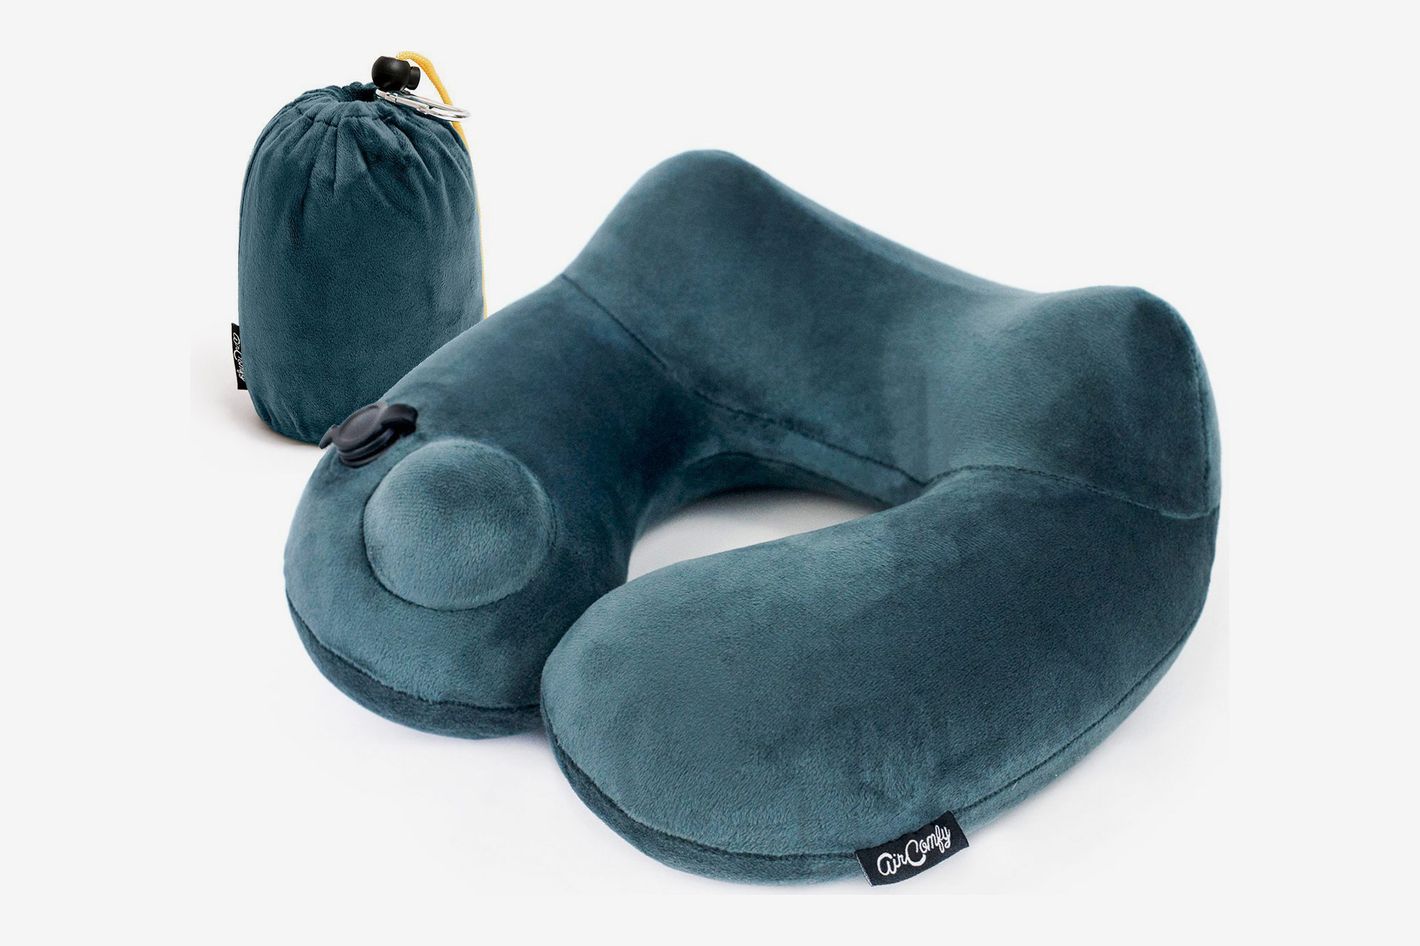 15 Best Travel Pillows on Amazon 2018 — Neck Support